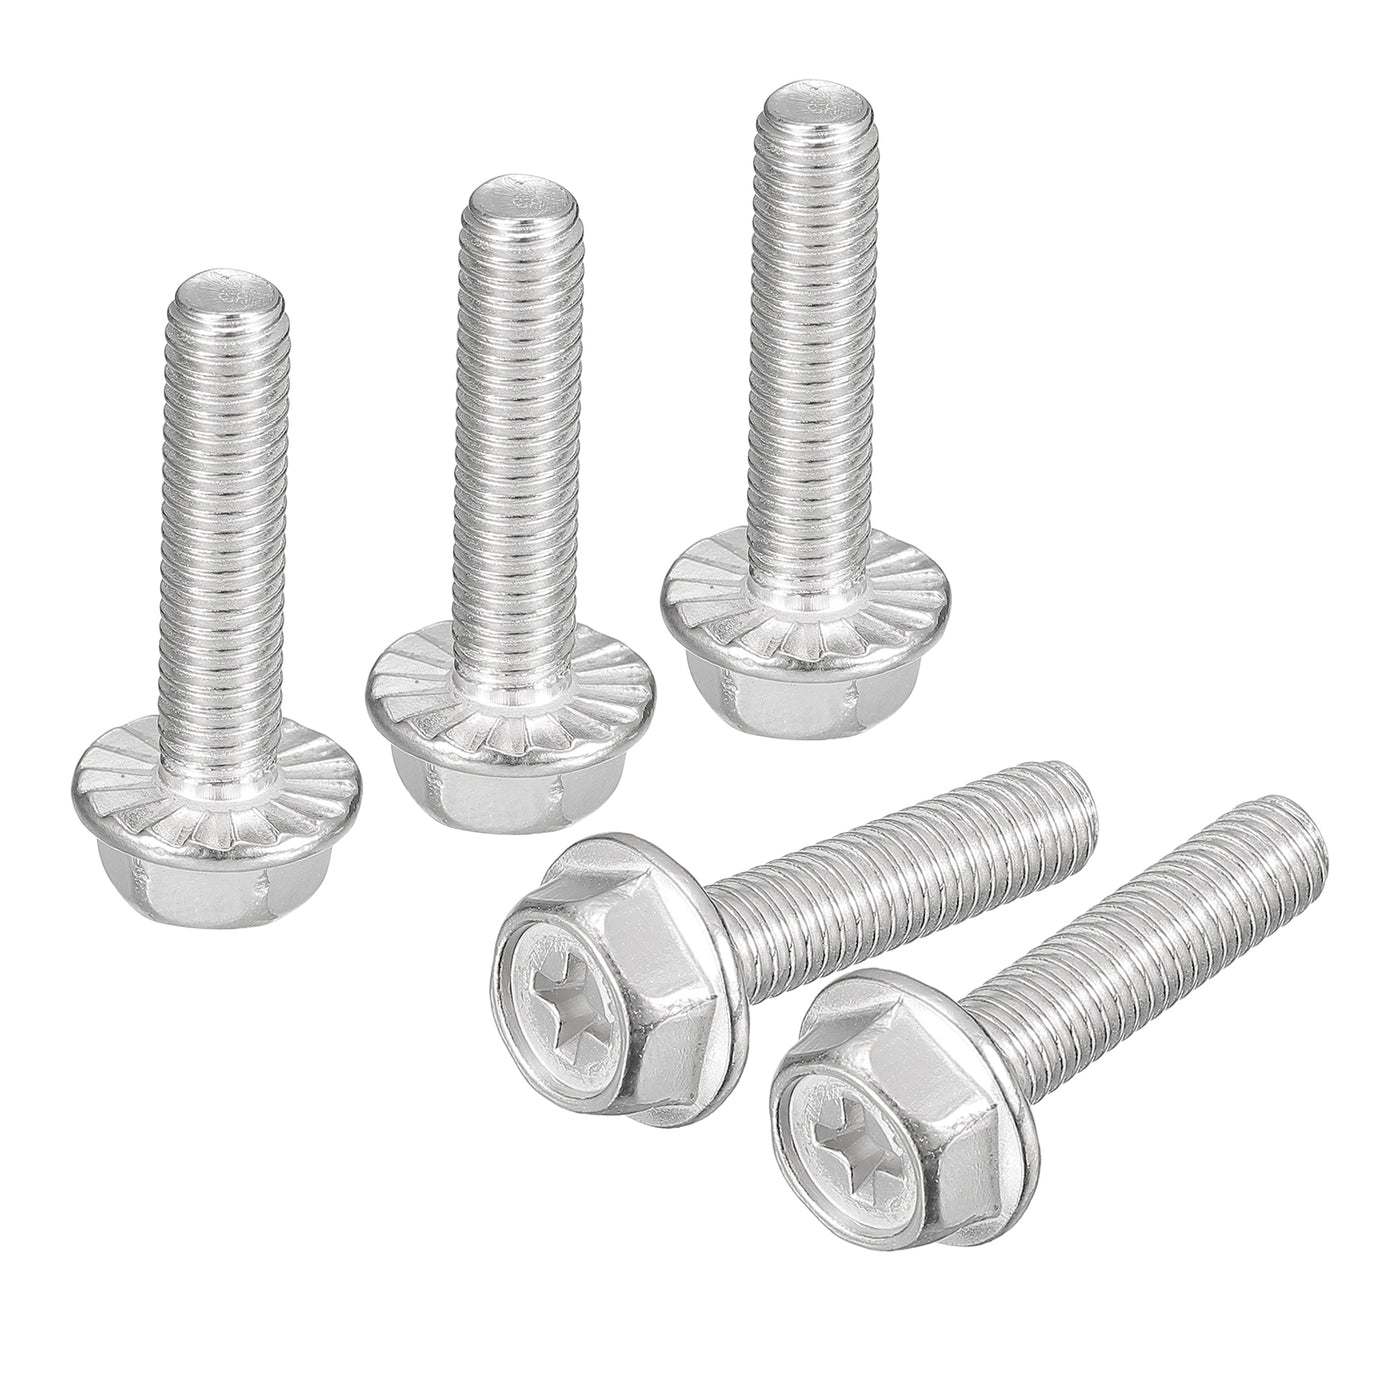 uxcell Uxcell M6x25mm Phillips Hex Head Flange Bolts, 20pcs 304 Stainless Steel Screws